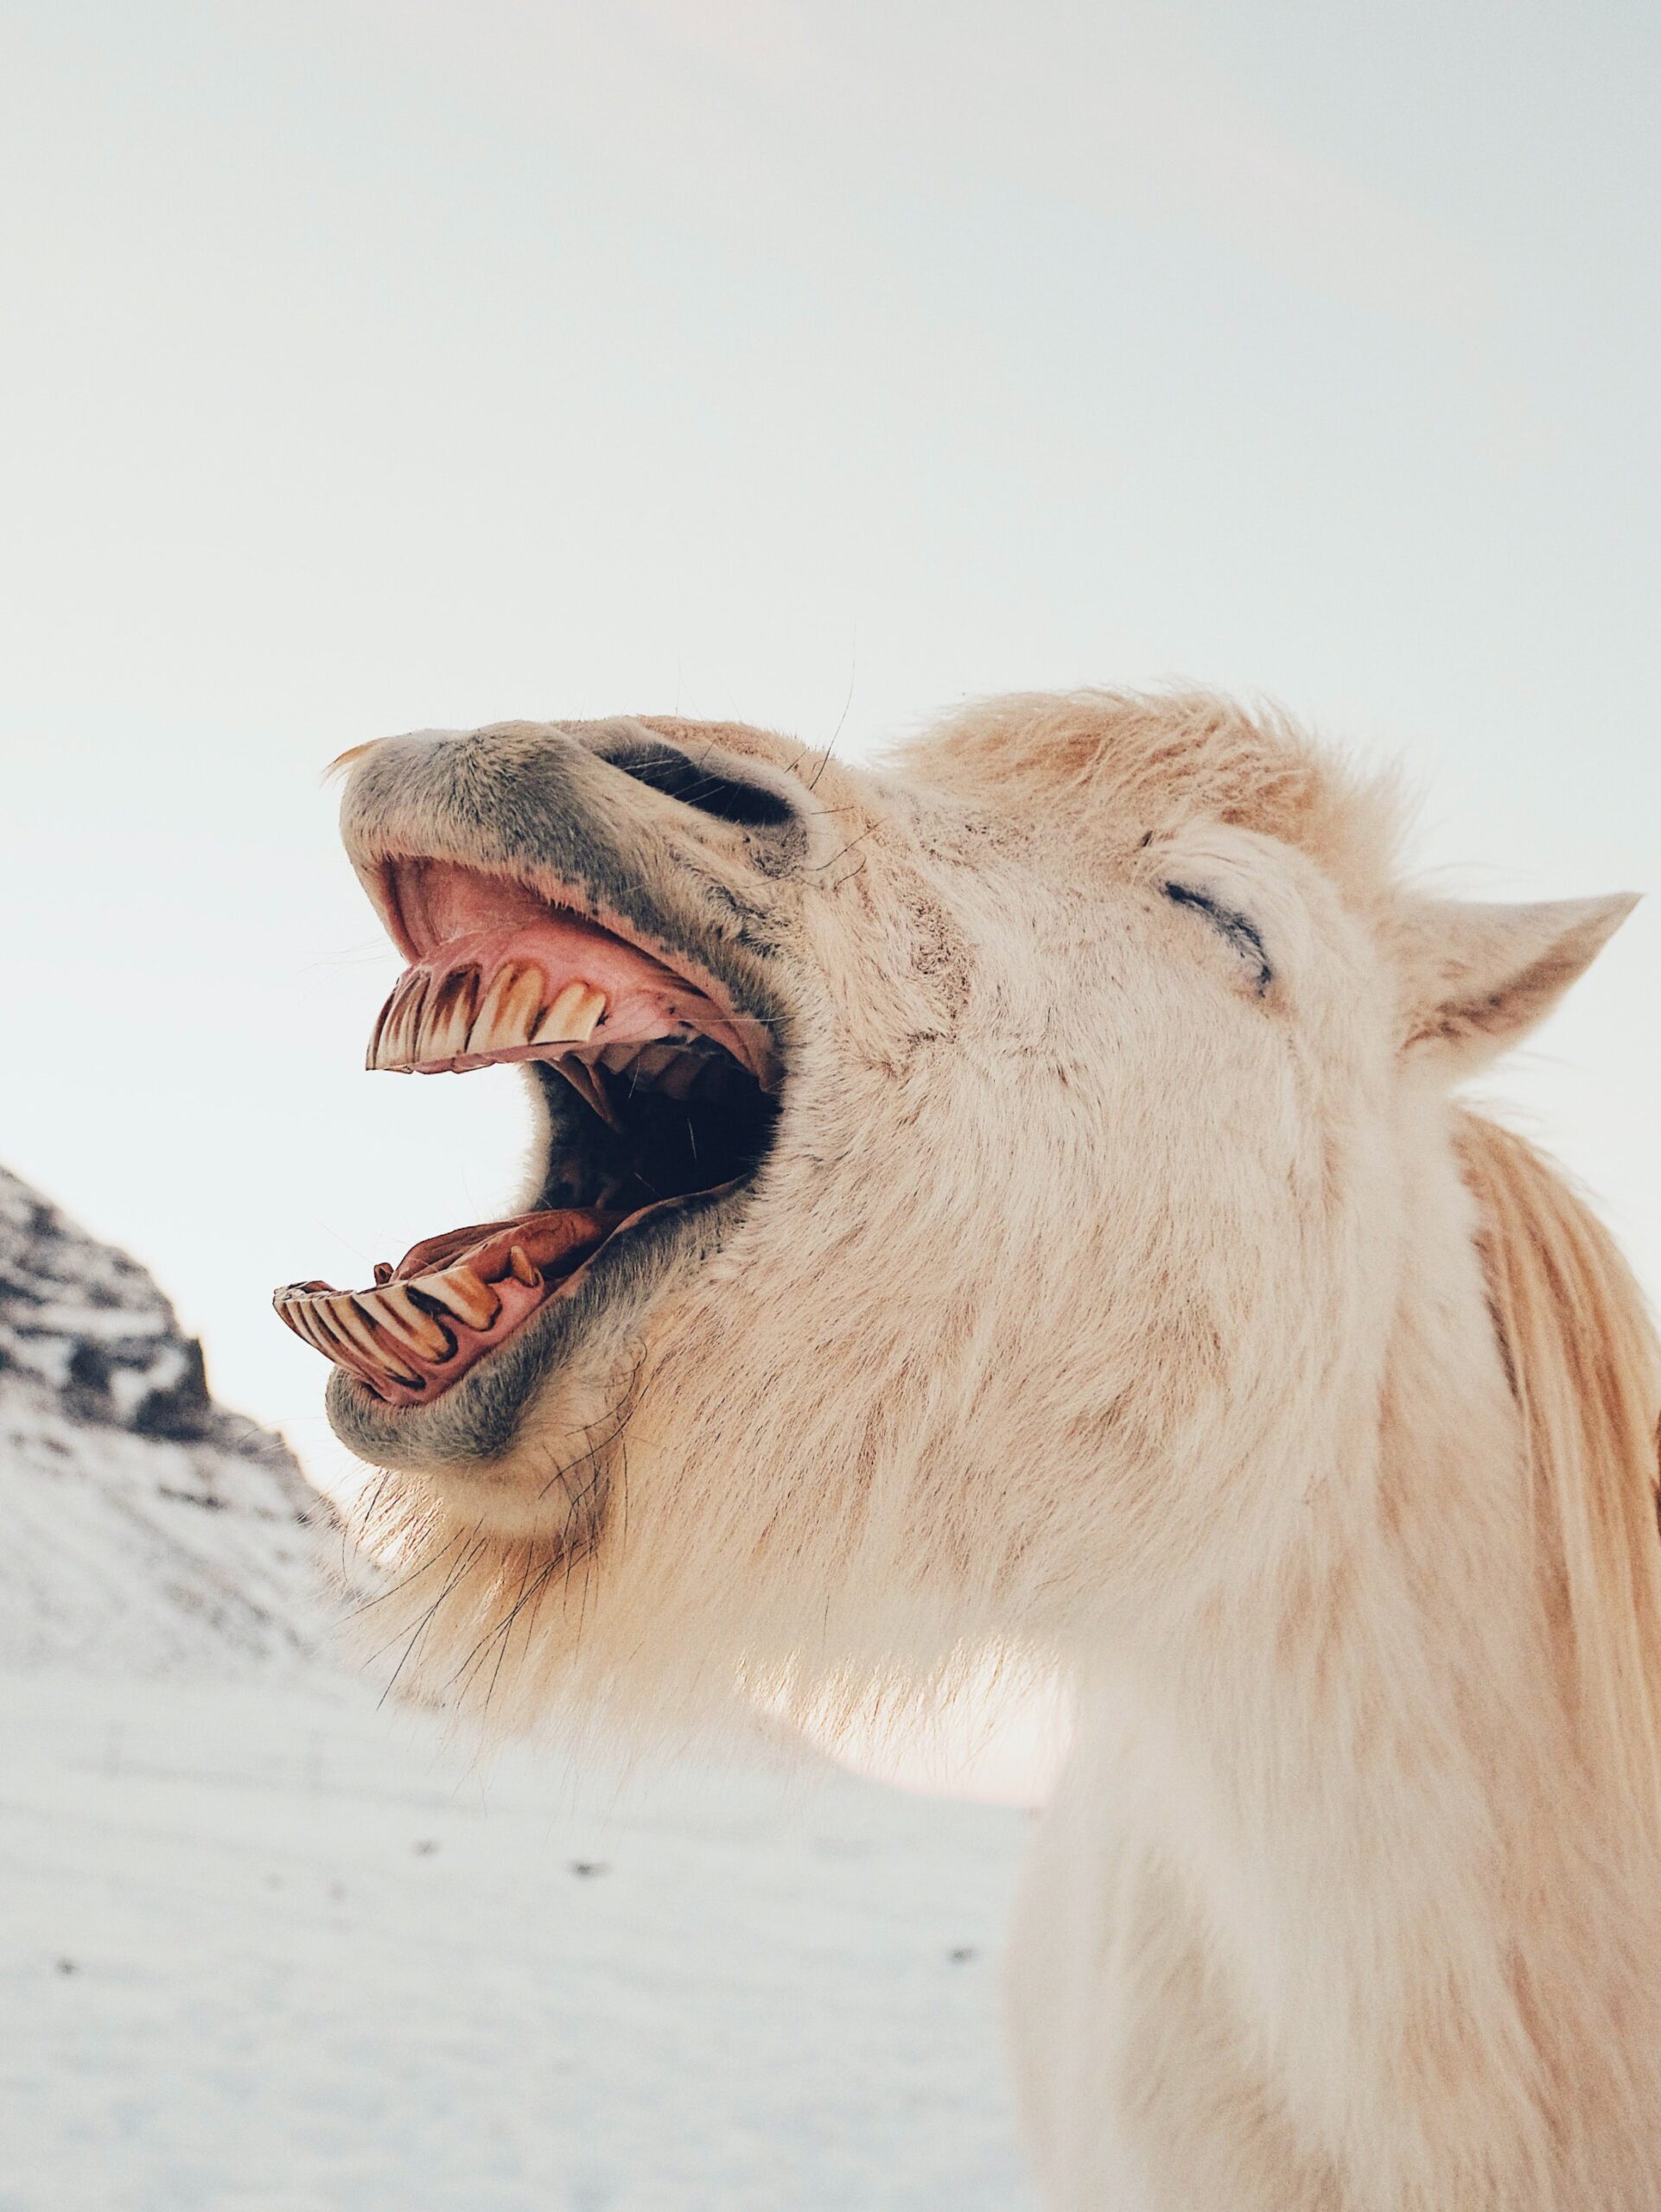 Lessons From The Story Of Balaam’s Talking Donkey